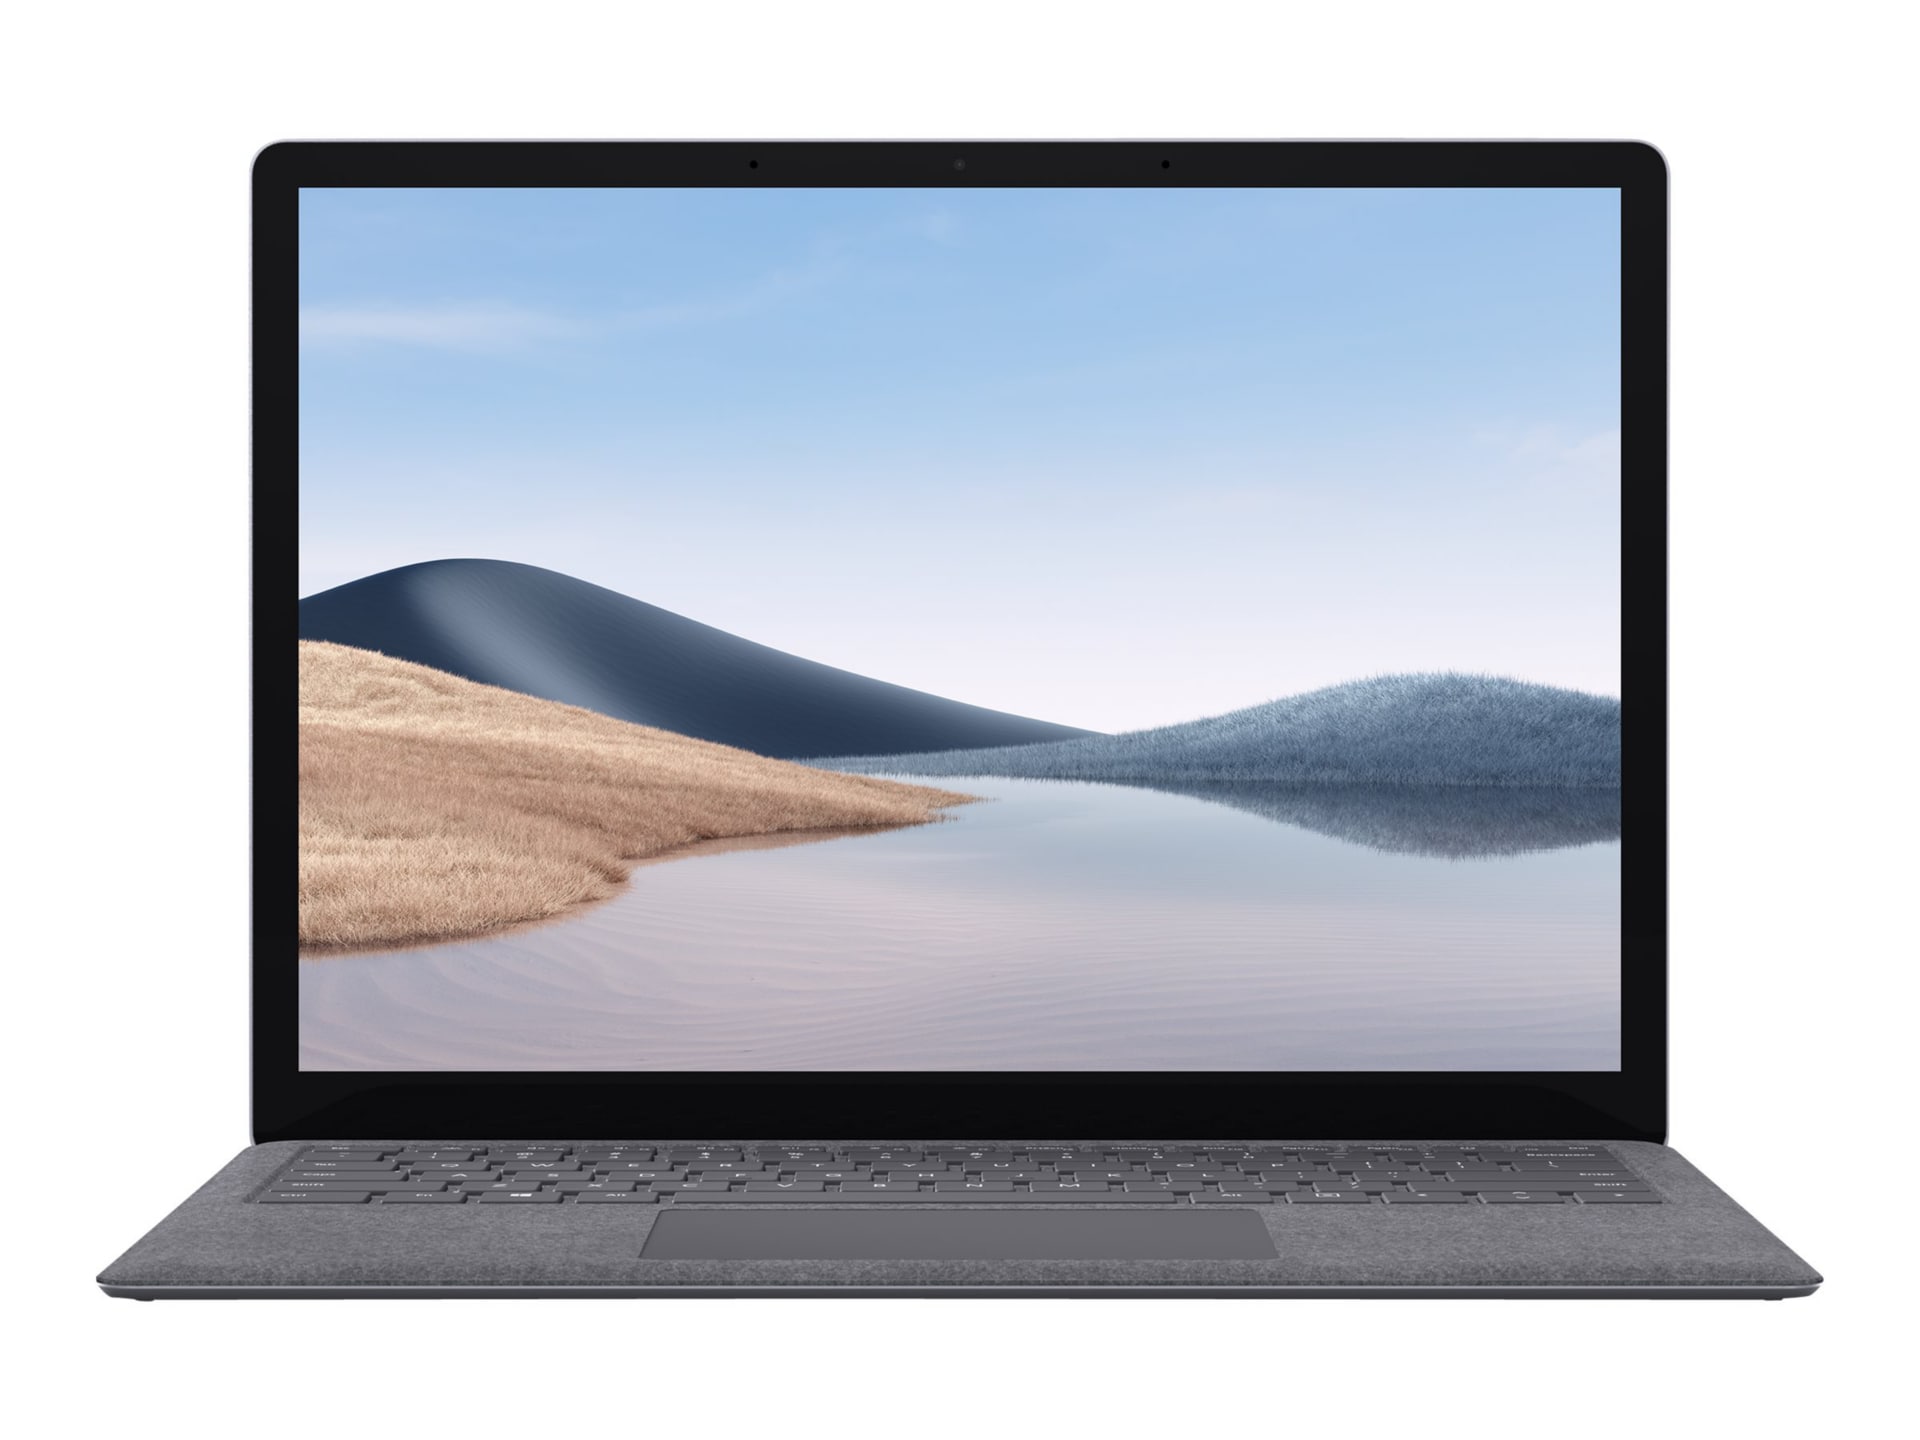 Microsoft Surface Laptop 4 for Business - 15" - Intel Core i7 - 1185G7 - 8 GB RAM - 256 GB SSD - QWERTY